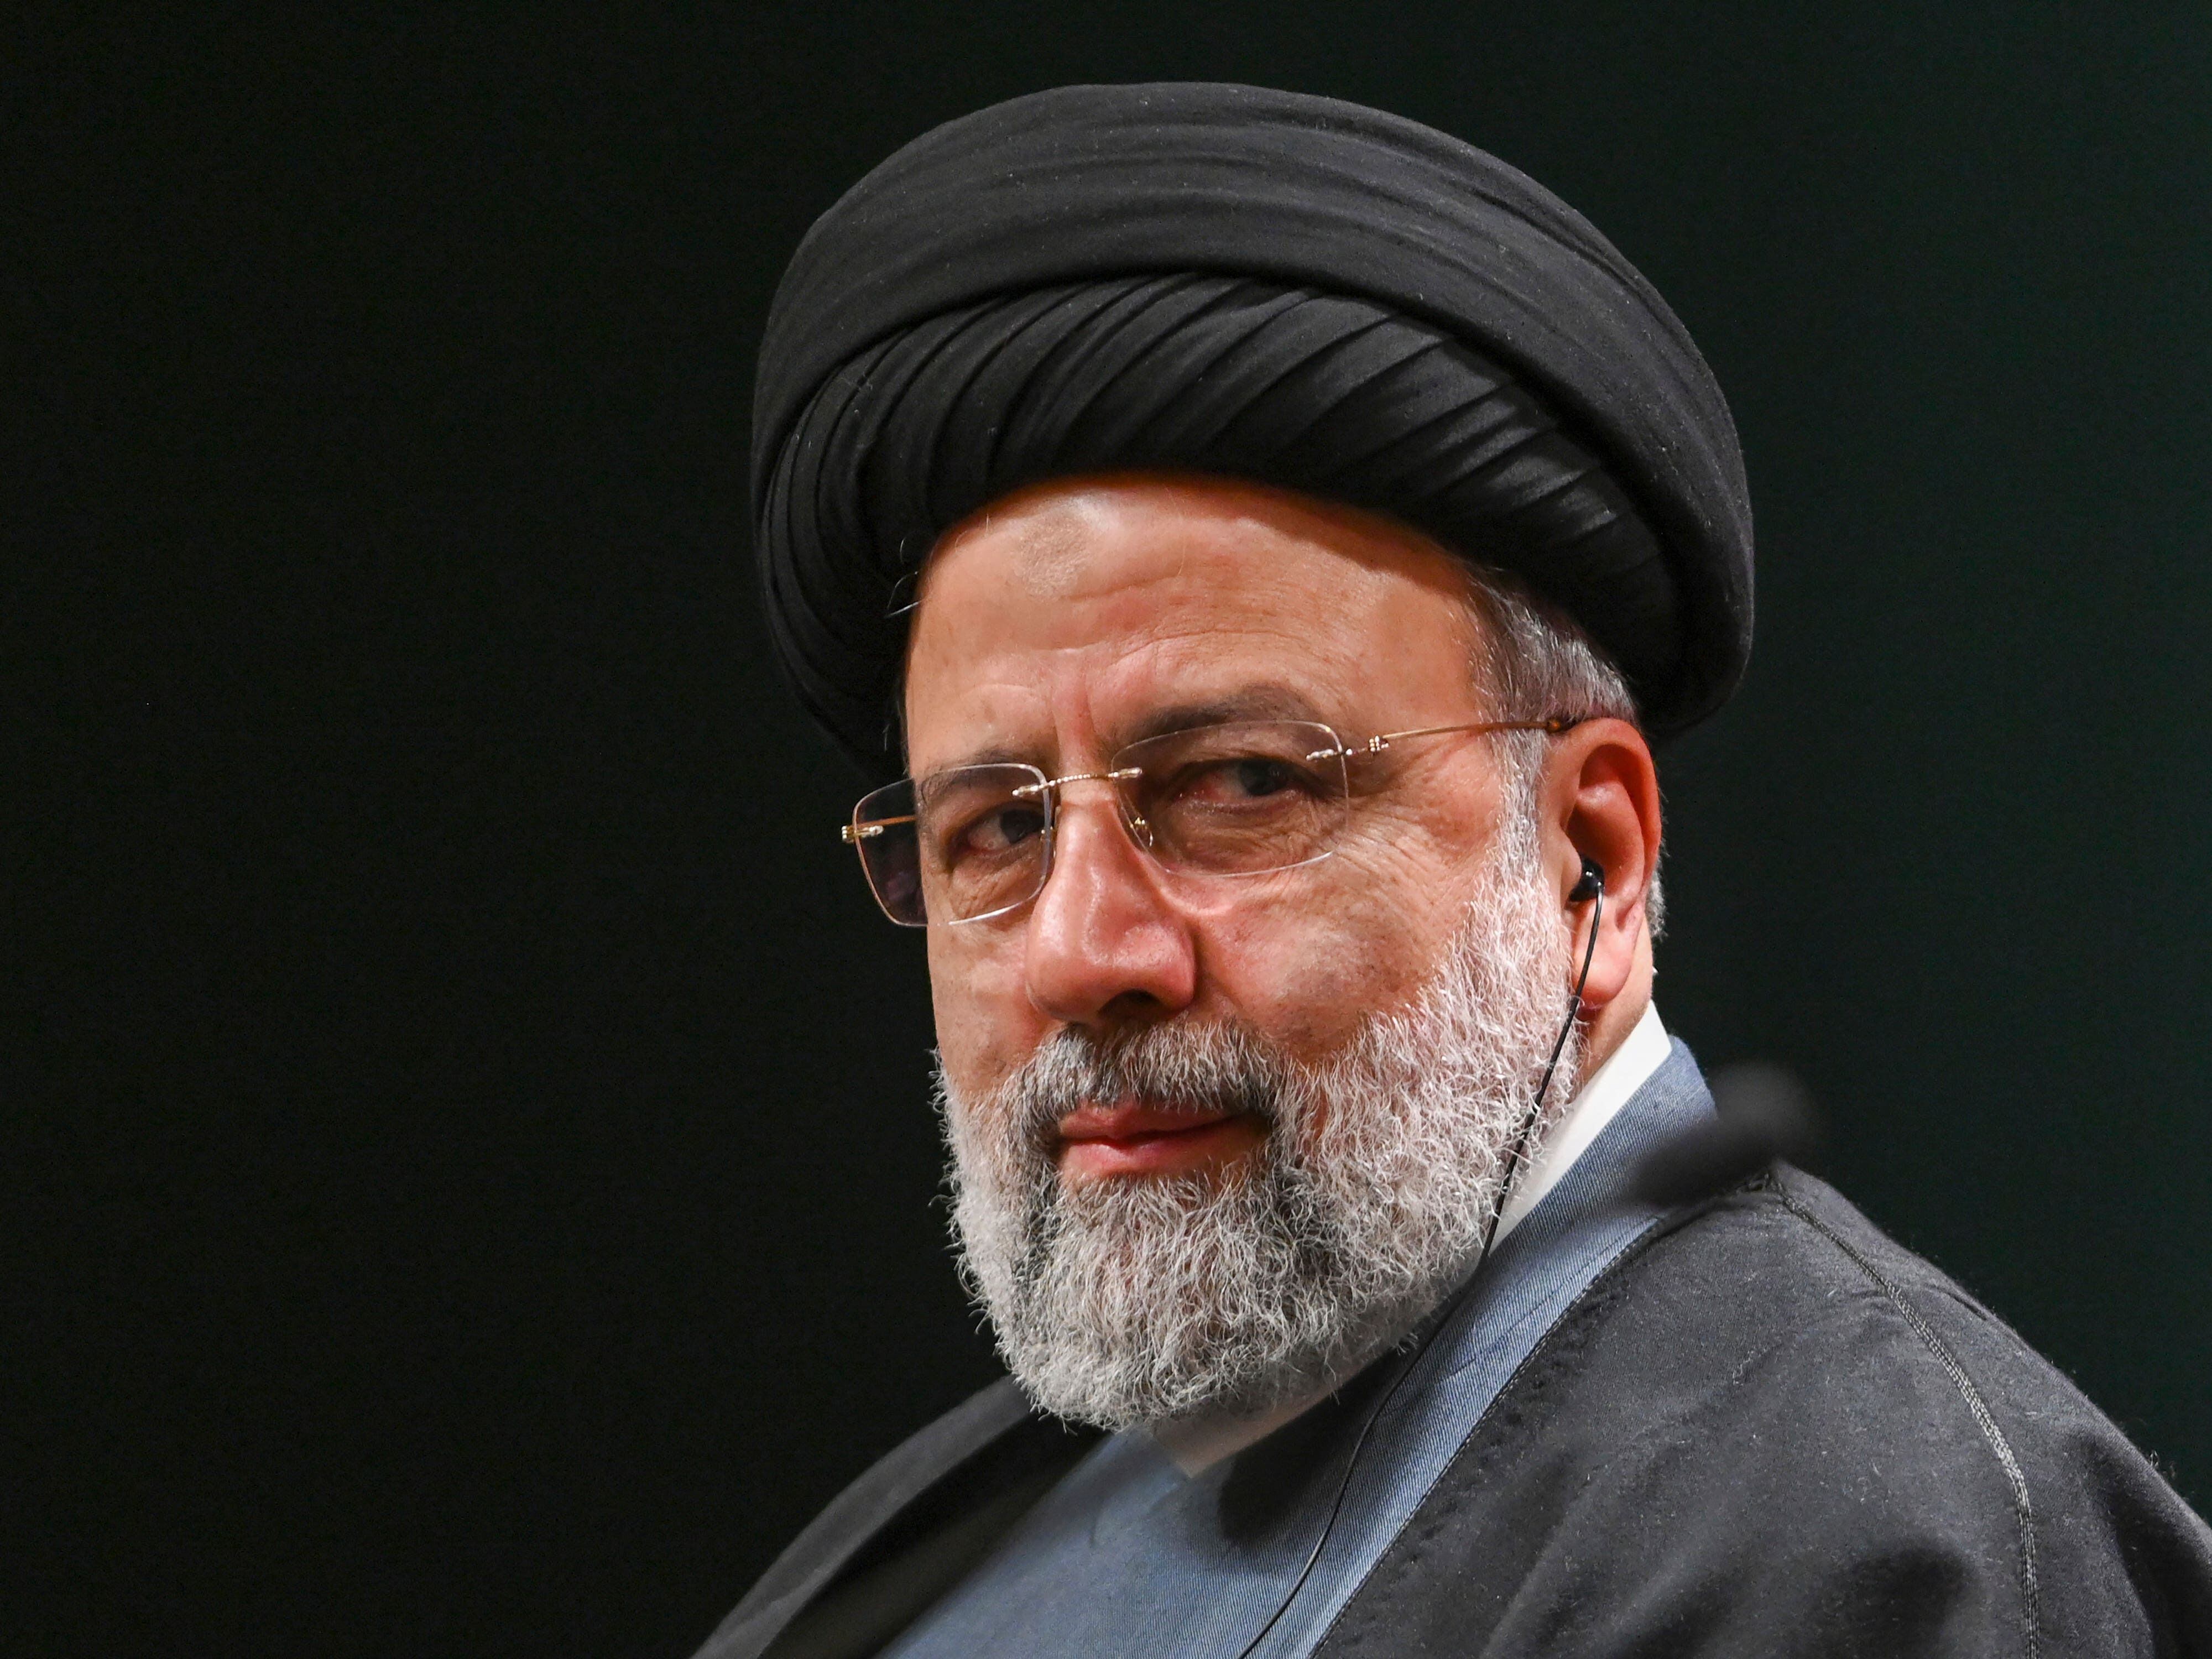 Iran’s president and foreign minister die in helicopter crash